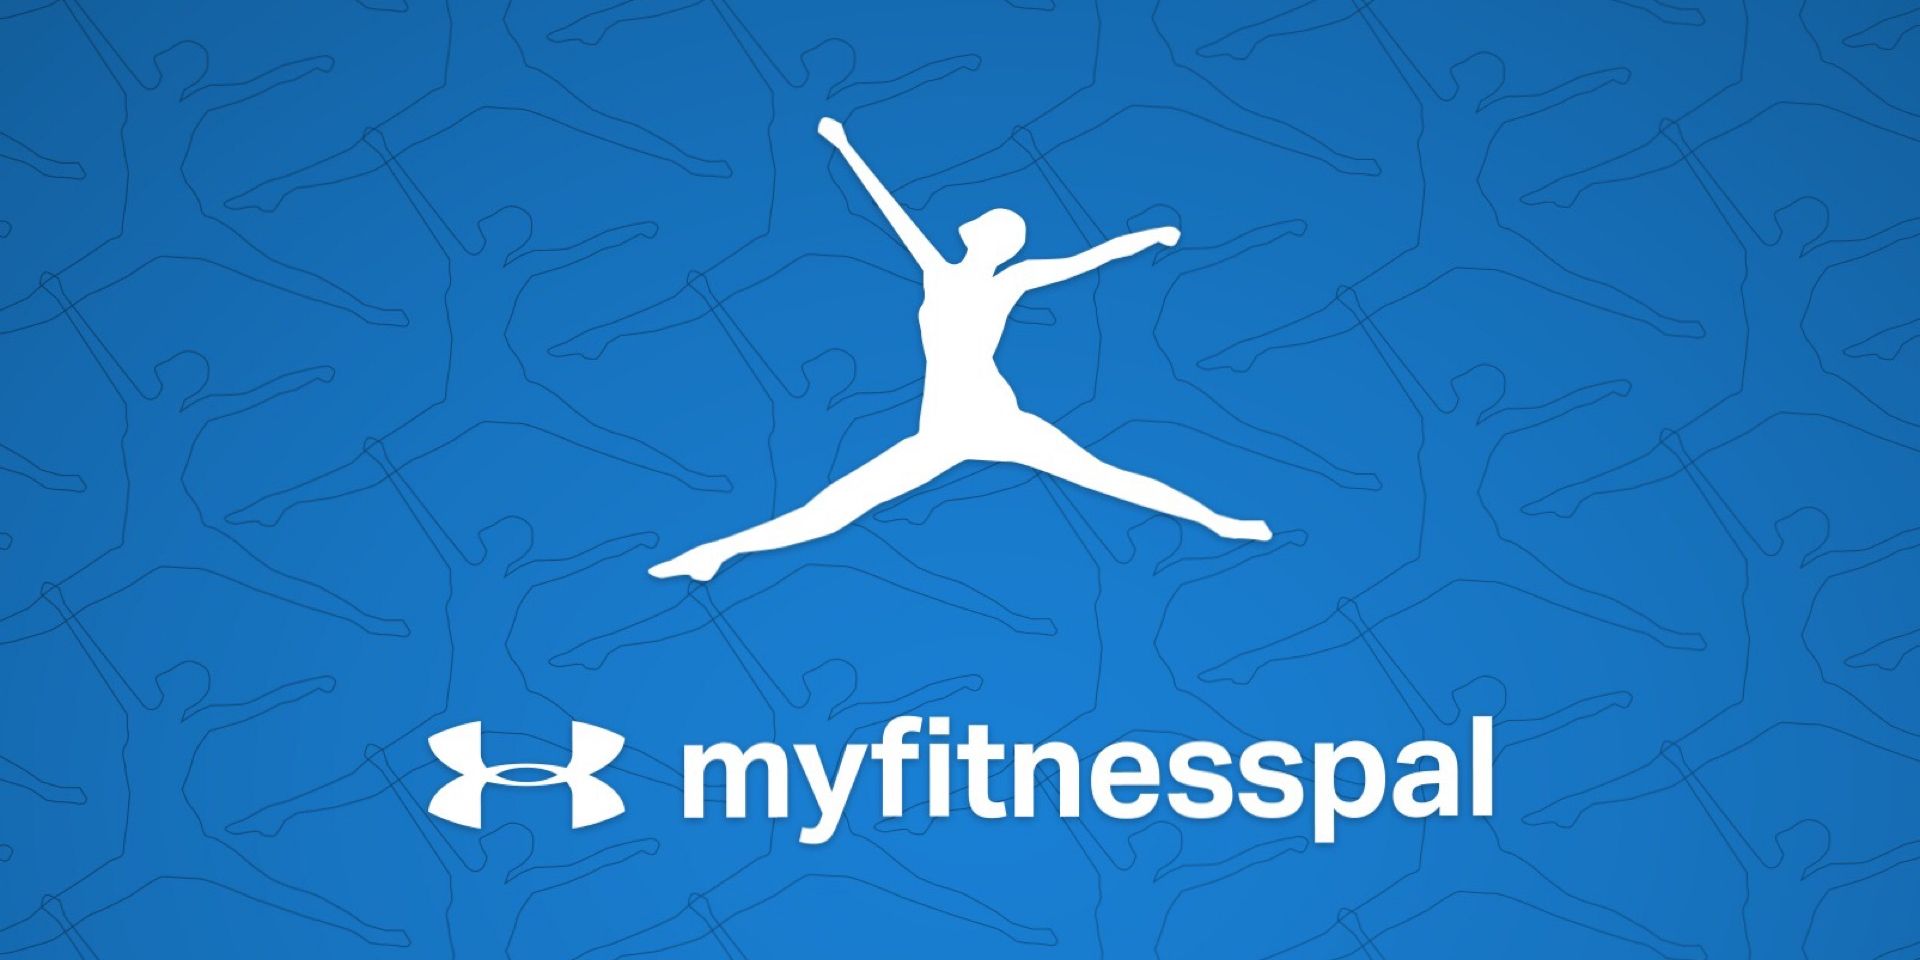 HOW TO USE MYFITNESSPAL TO HELP ACHIEVE YOUR FITNESS GOALS ON IOS AND ANDROID